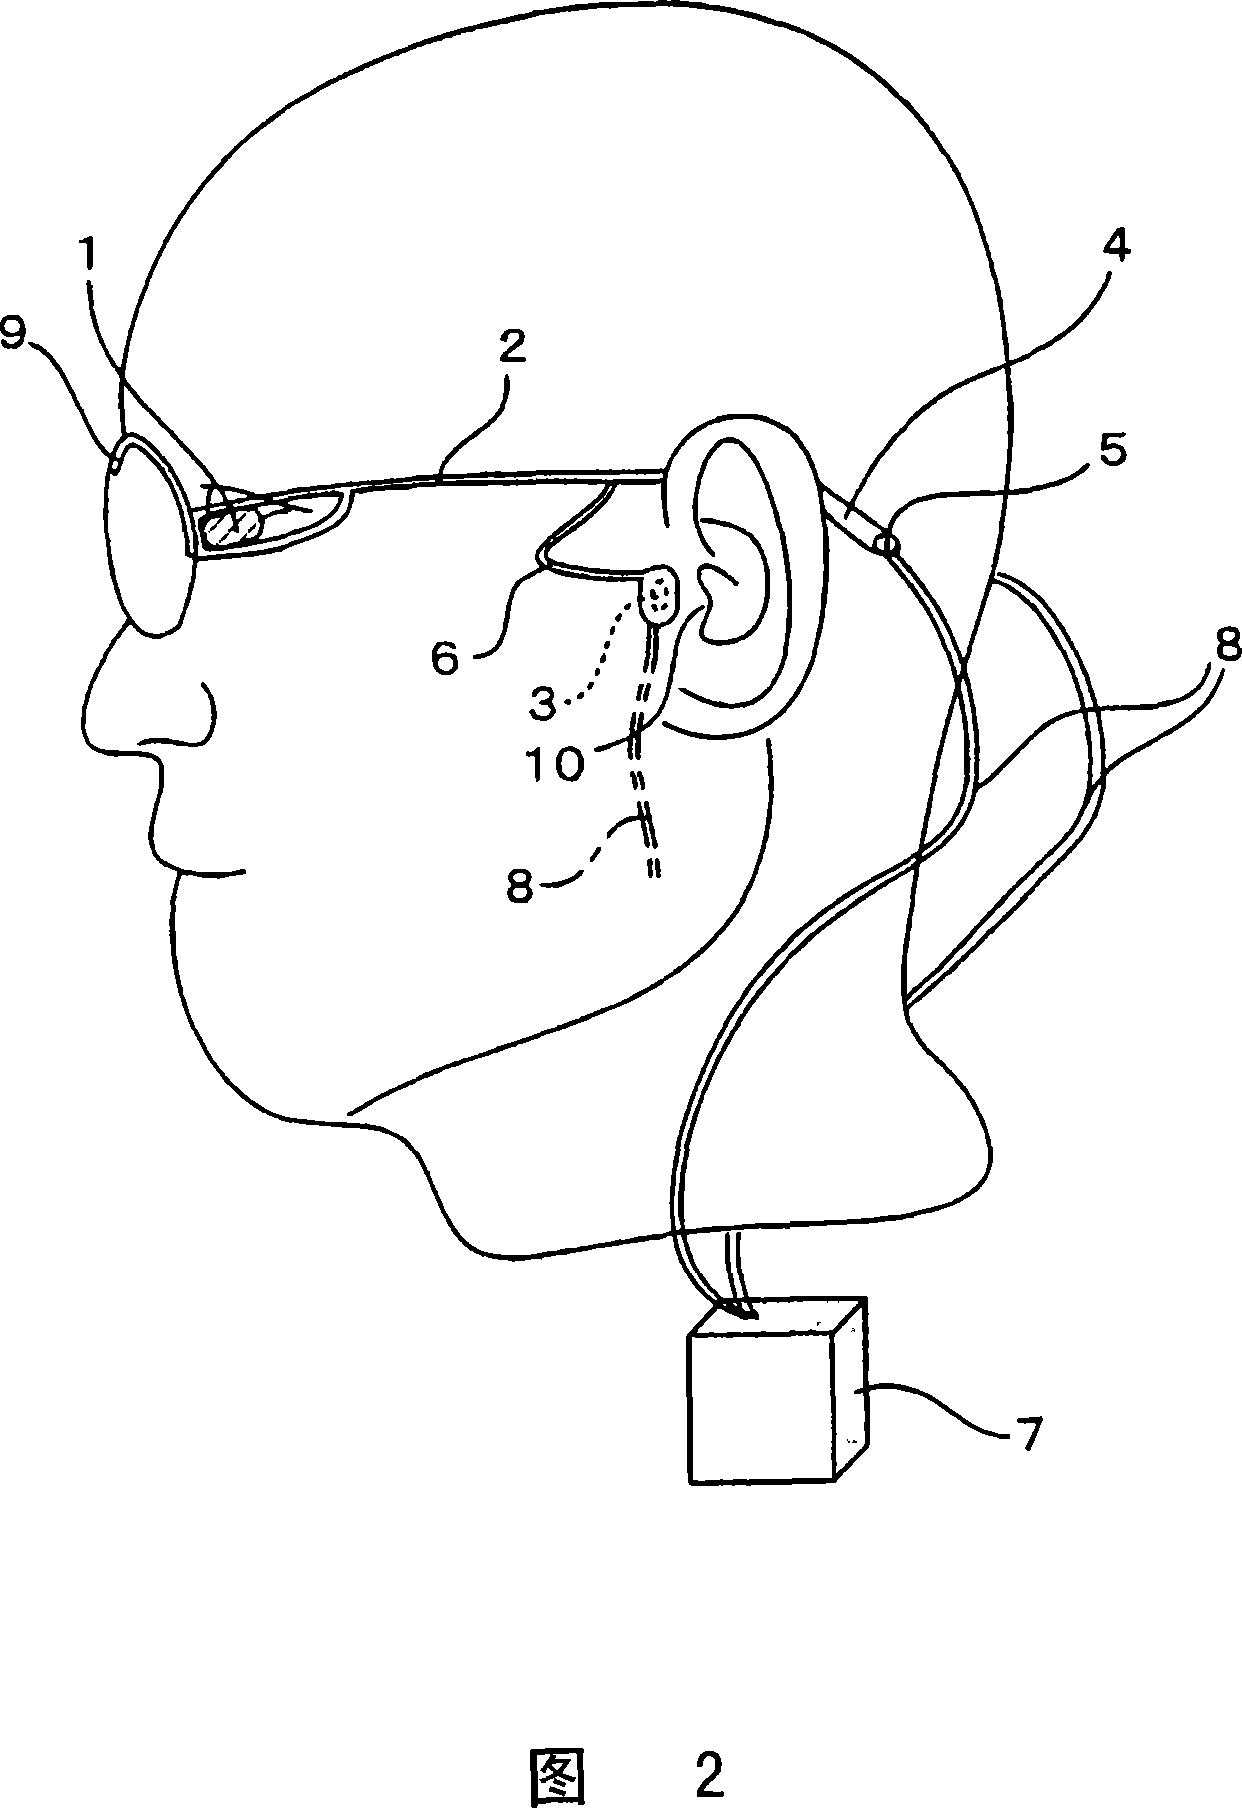 Spectacle type communication device